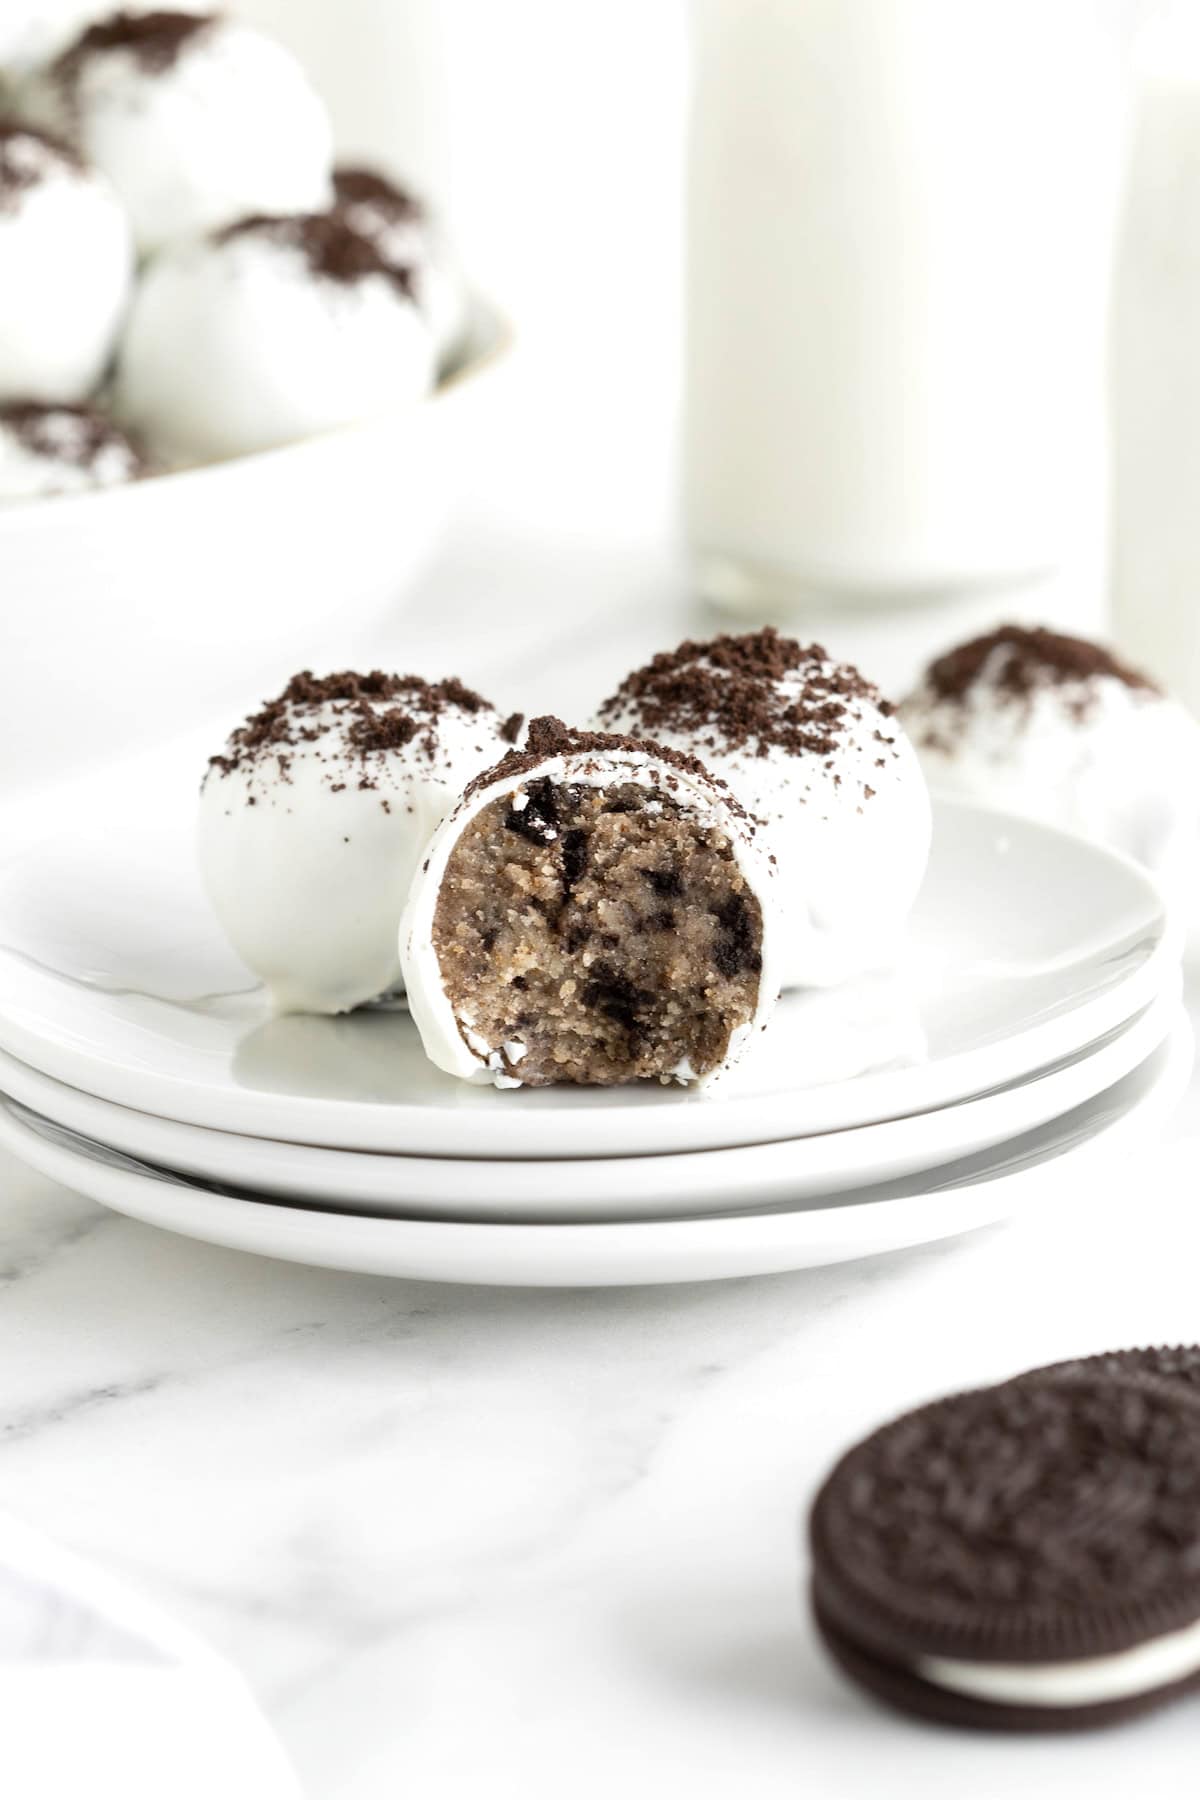 There Oreo cake balls on a stack of three white plates. The front cake ball has a bite out of it.